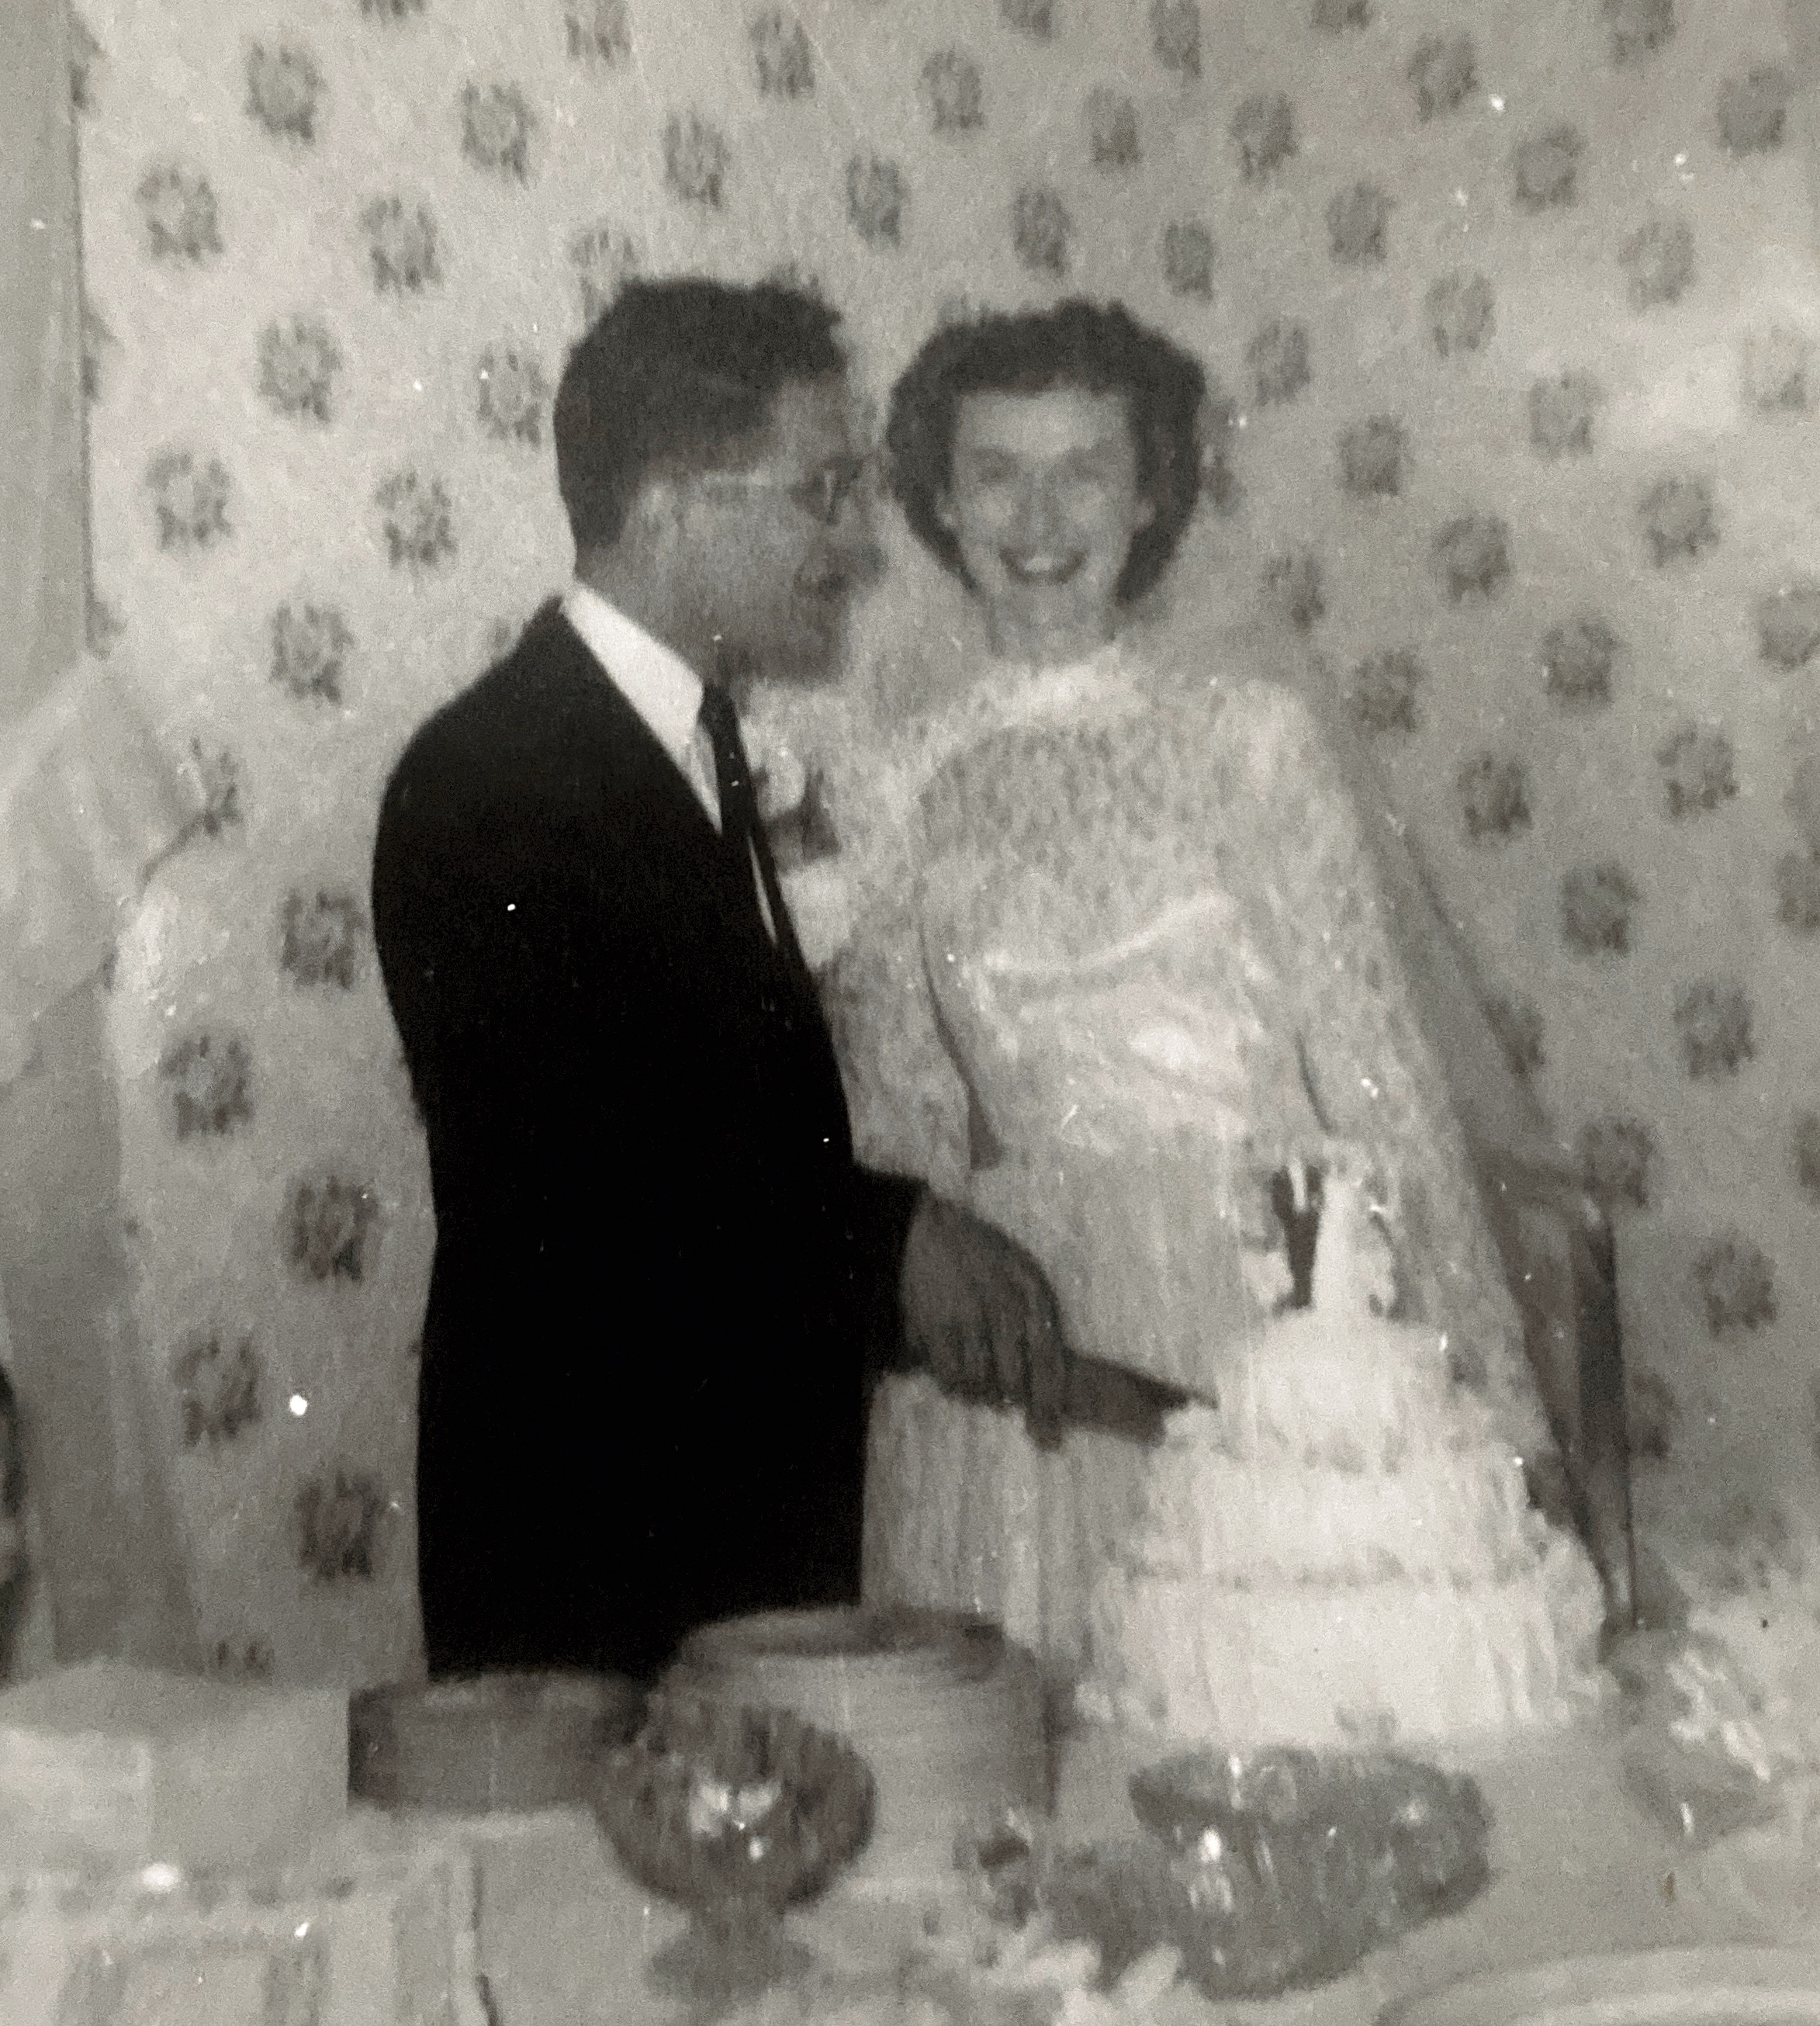 Wedding of Mauro Fisher and Donna Lawless 1952